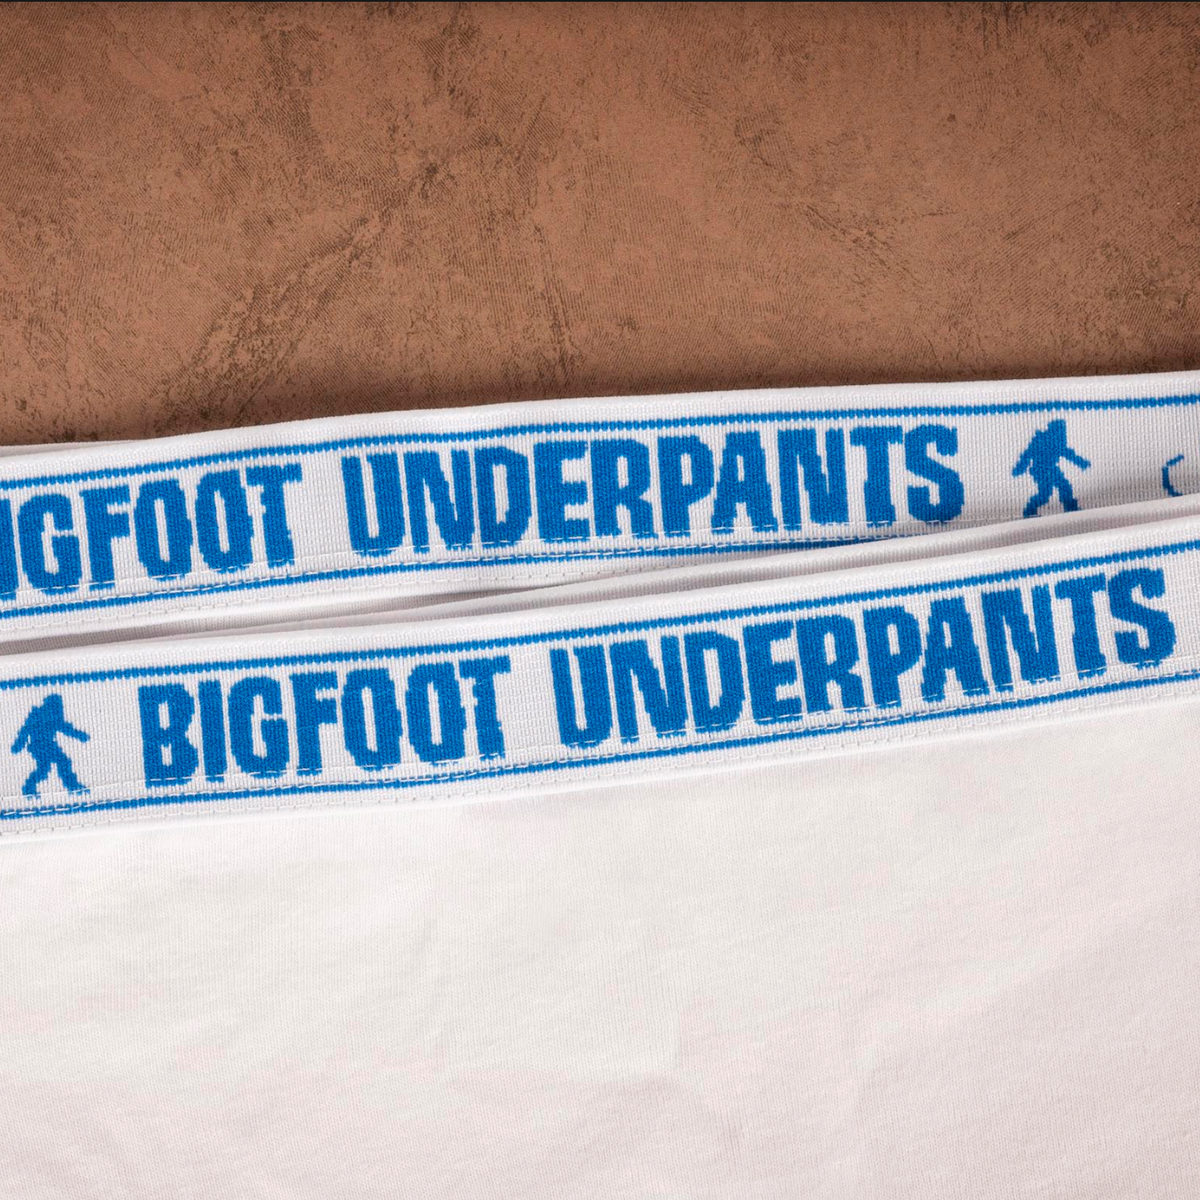 The waistband of underpants. They say, "Bigfoot Underpants" and there is a tiny Bigfoot next to the words. The pattern repeats. 